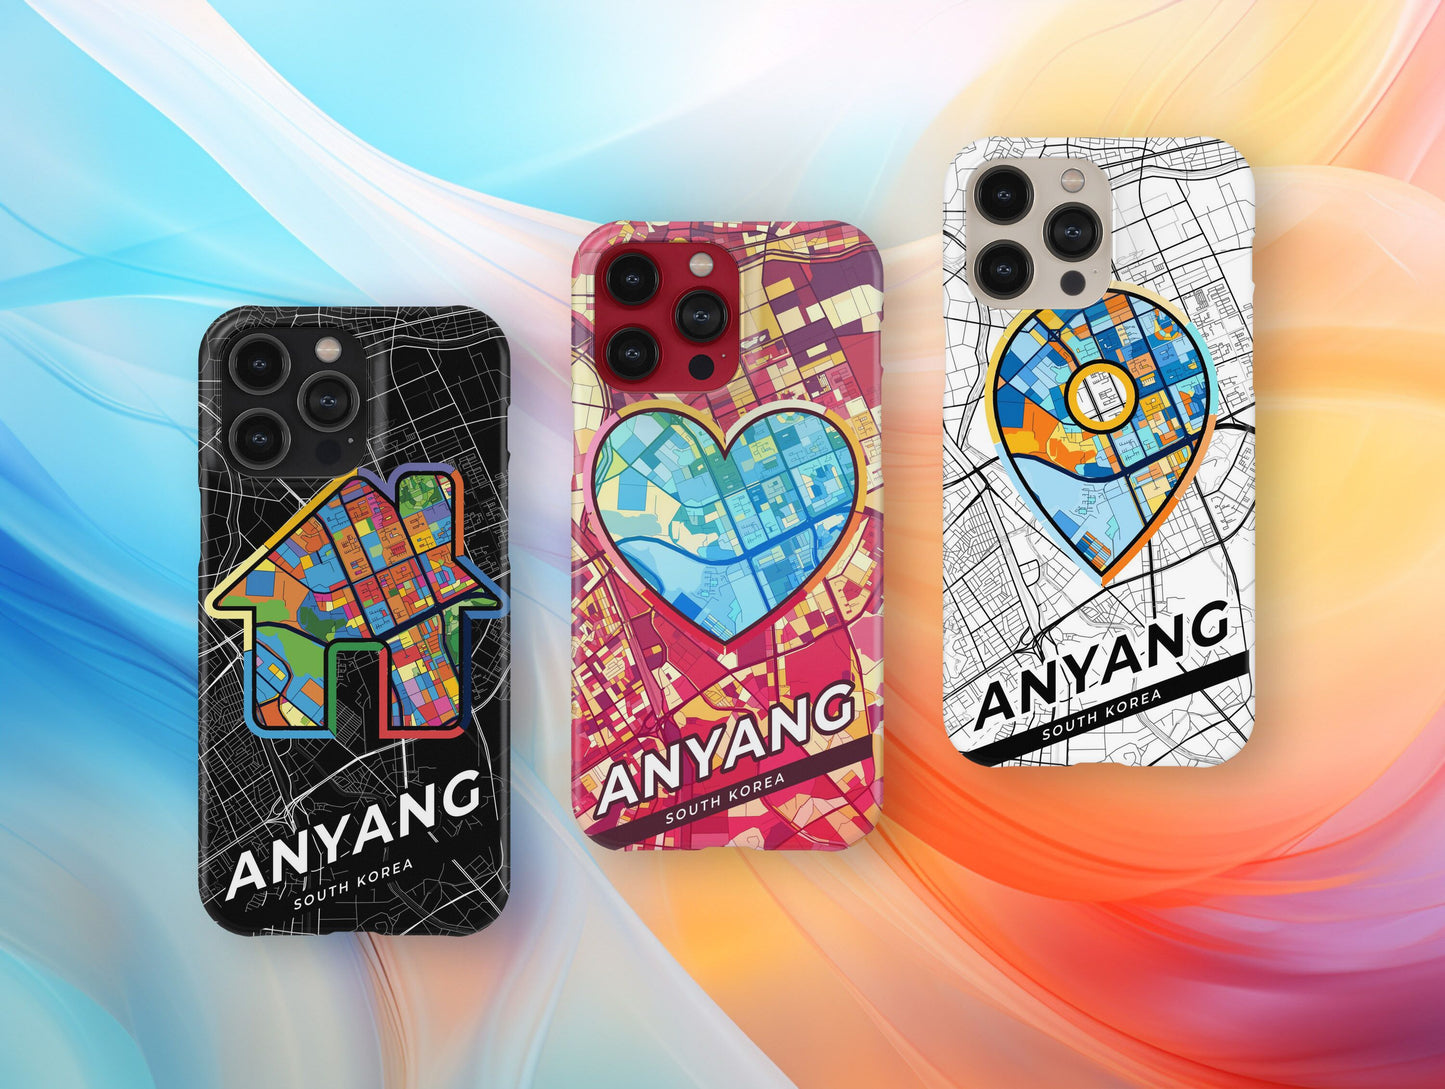 Anyang South Korea slim phone case with colorful icon. Birthday, wedding or housewarming gift. Couple match cases.